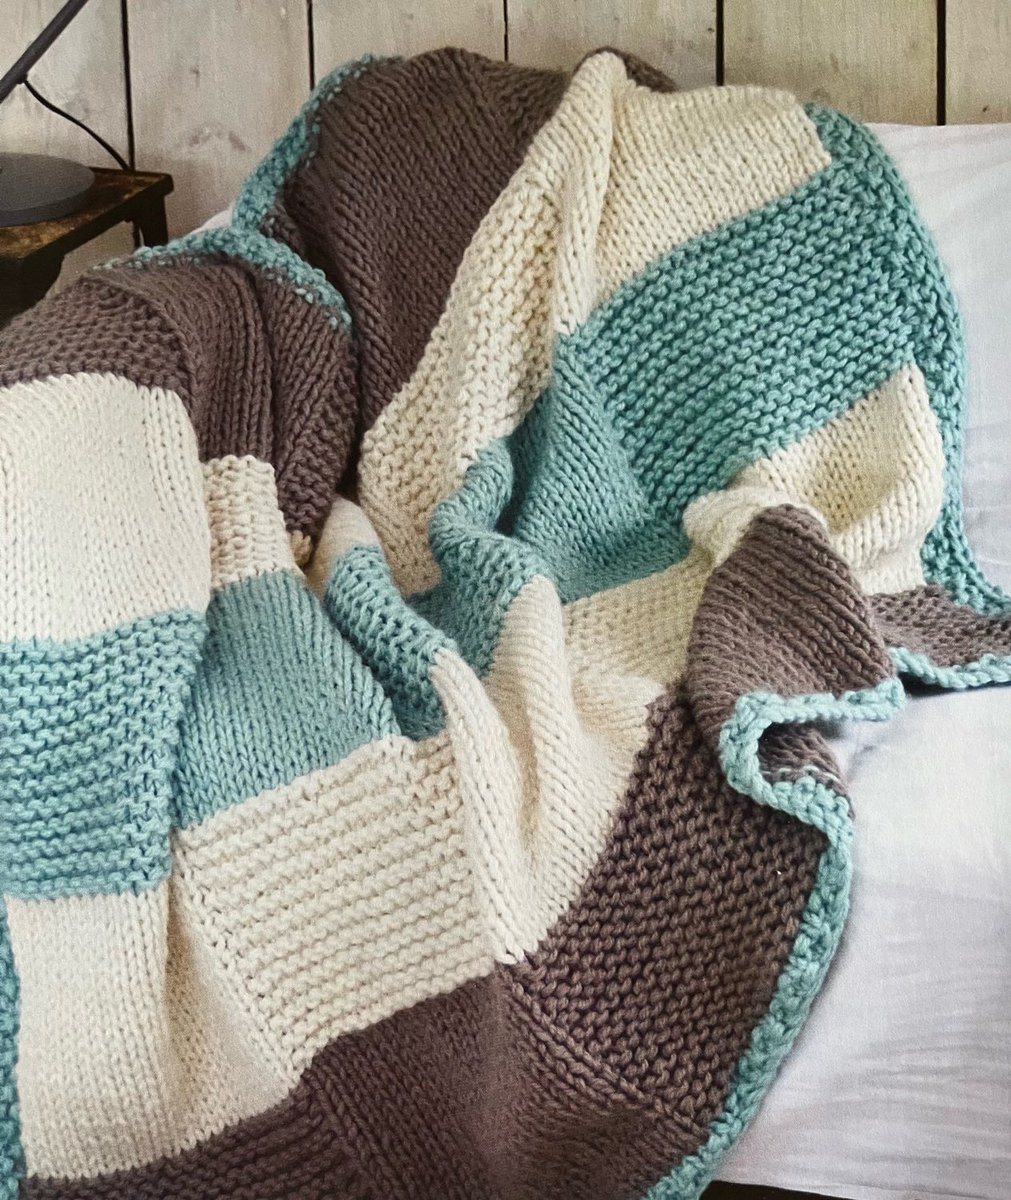 Excited to share this item from my #etsy shop: Knitted Chunky Check Blanket Knitting Pattern #knit #sewing #knit #MHHSBD #earlybiz #shopindie #wip #yarn #knittingpattern #chunkyblanket #yarnblanket #knittedblanket #throw #blankets etsy.me/3WLx13x